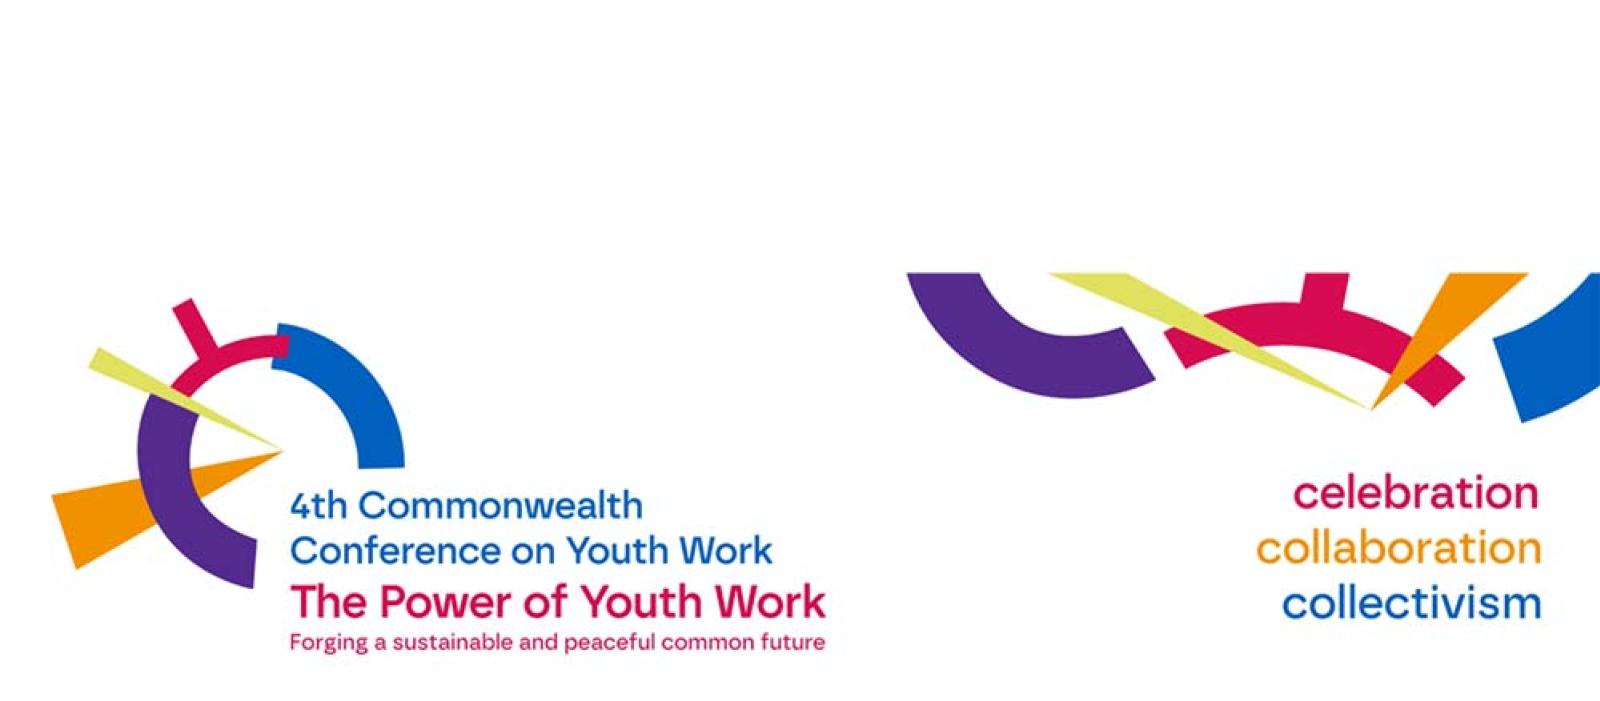 Pakistani youth leader to present paper at Commonwealth Youth Conference